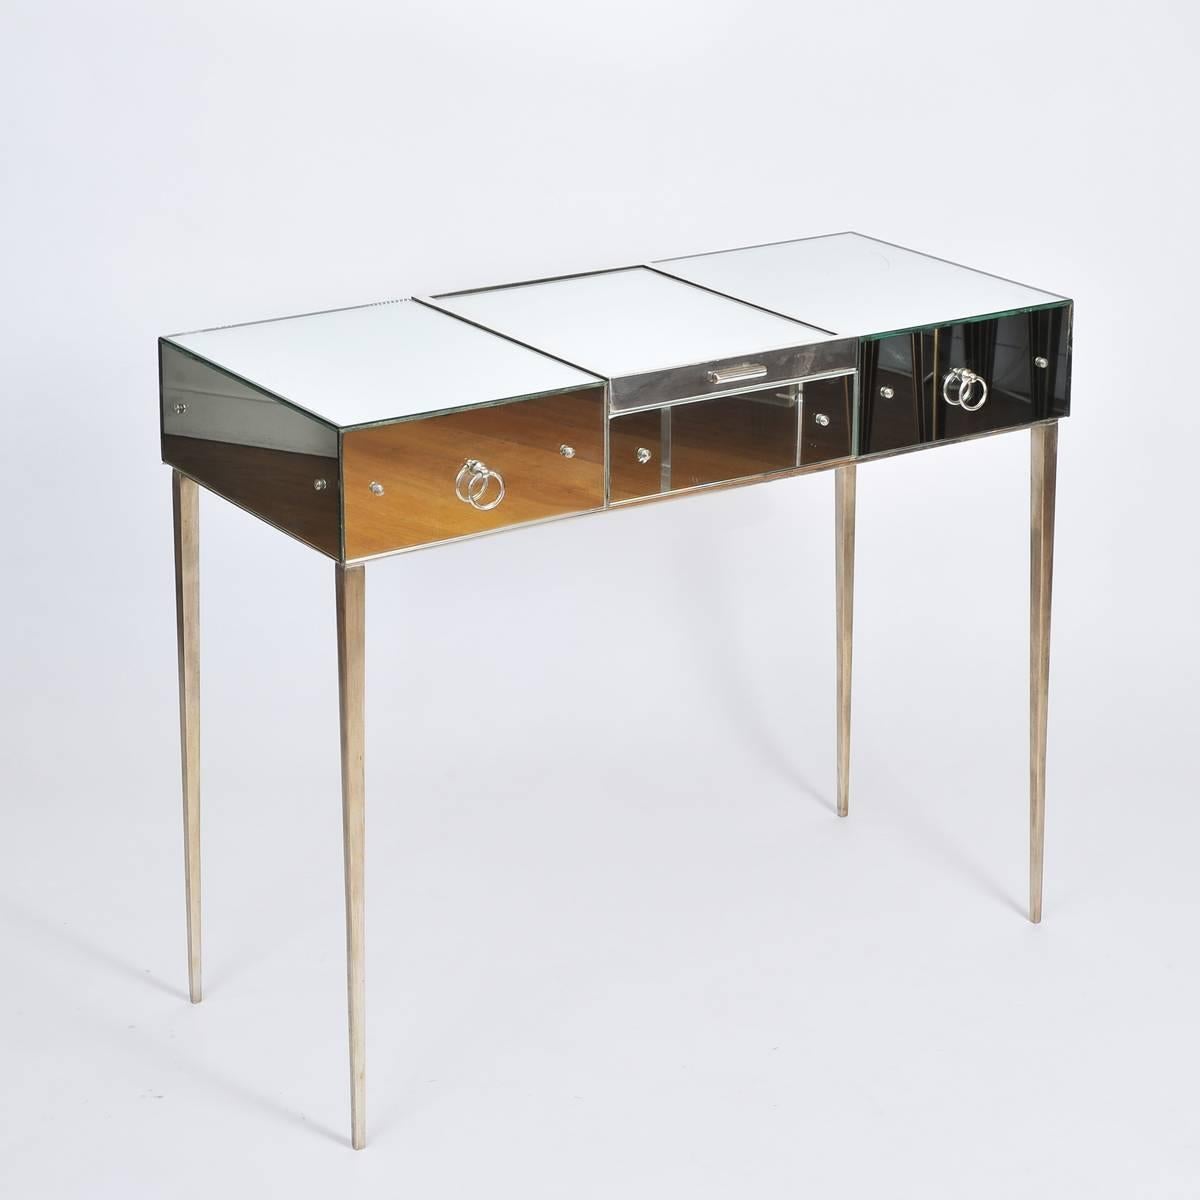 1930s mirrored dressing table, one of only two examples known, designed by Jean Michel Frank for Comté. The triptych configuration of two drawers and a central compartment accessed by lift-up vanity mirror, is all supported on exquisitely slender,